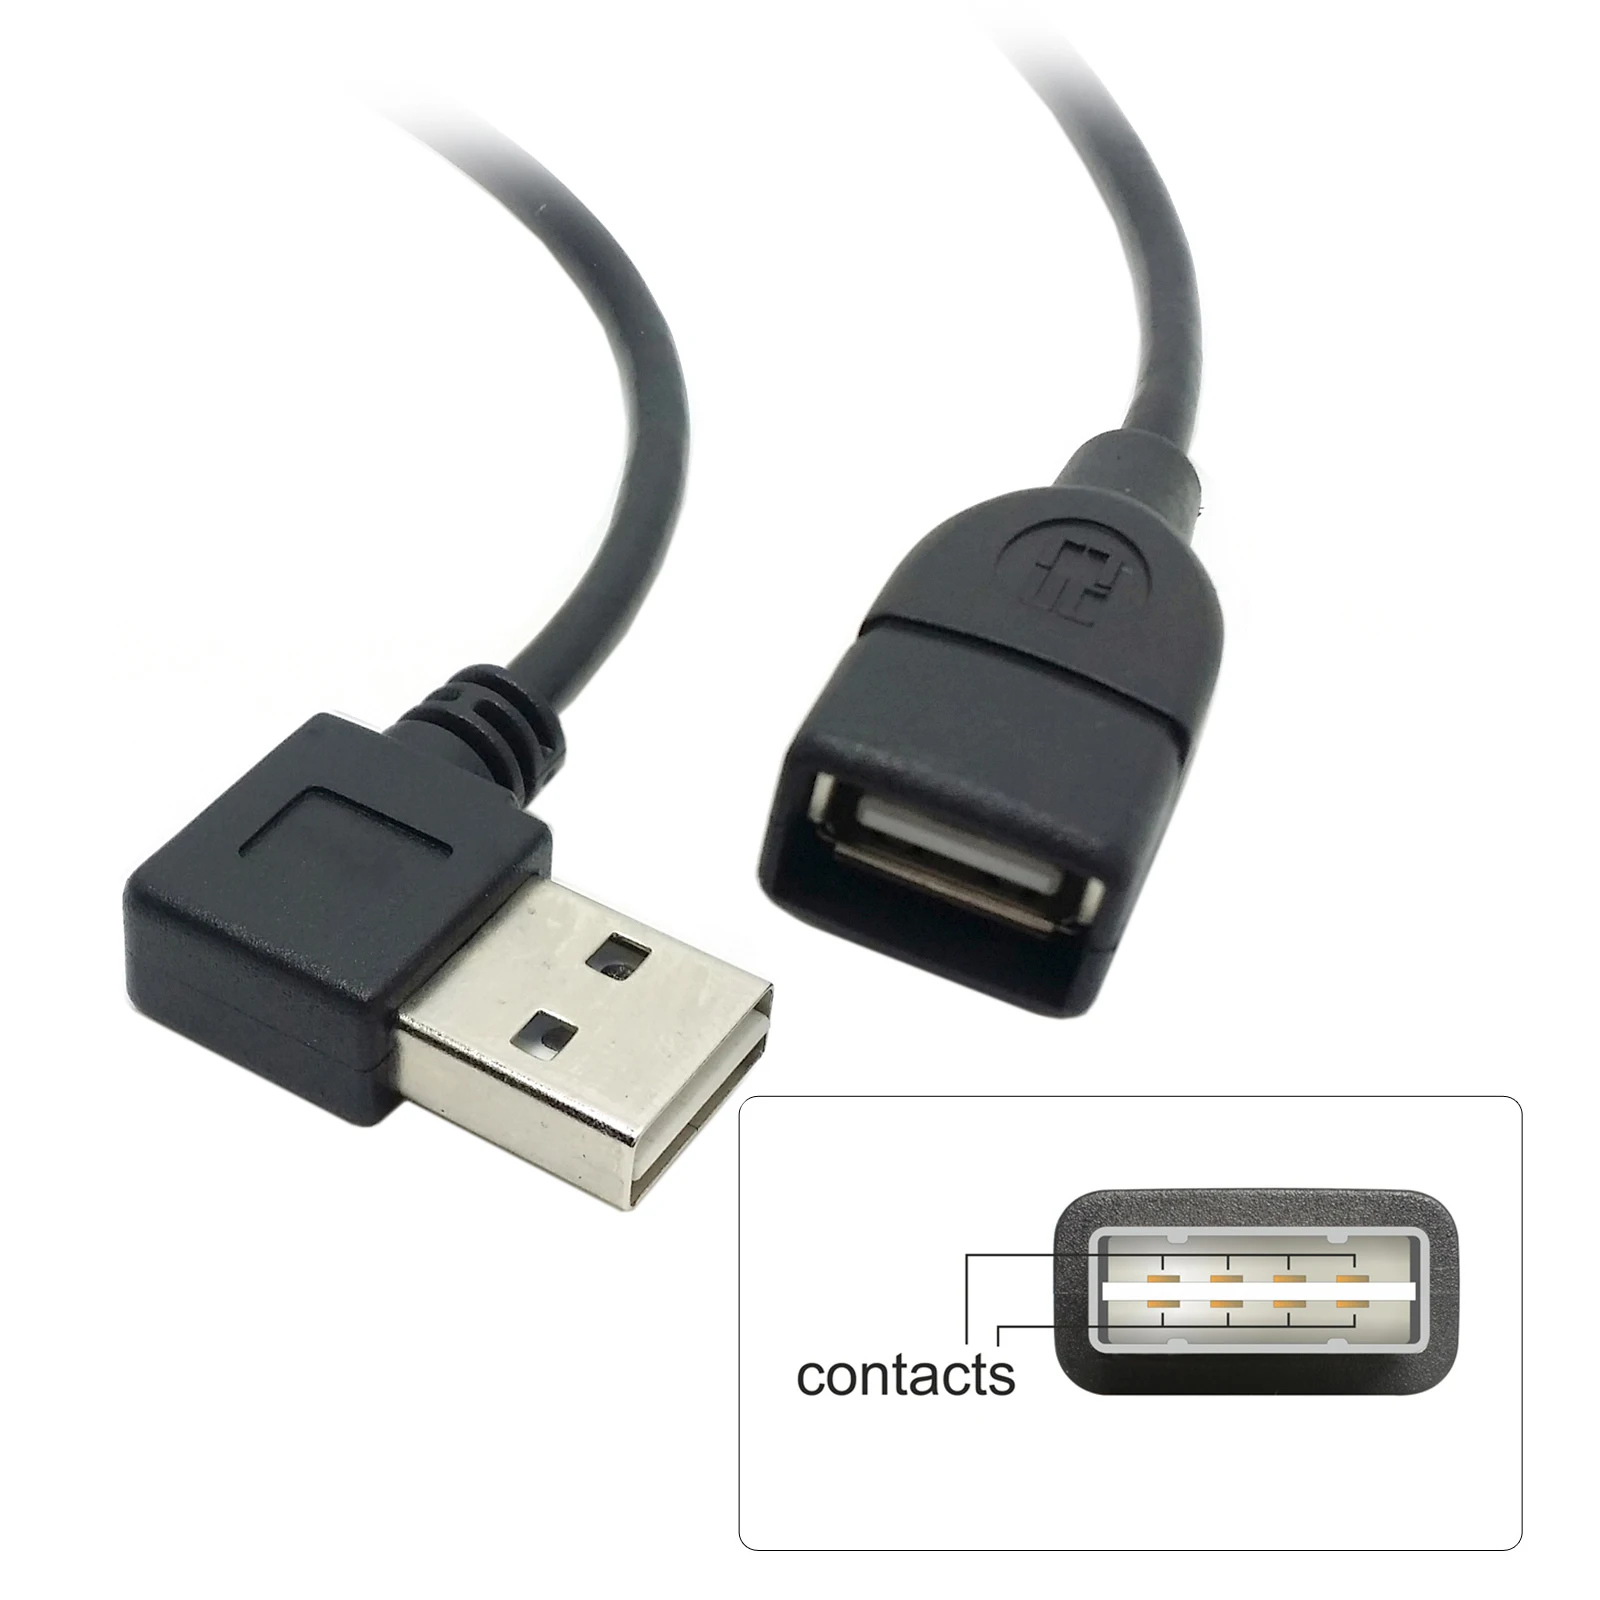 

CY USB Extension Cable USB 2.0 Cable USB 2.0 Male to Female Extension Cable 100cm Reversible Design Left Right Angled 90 Degree